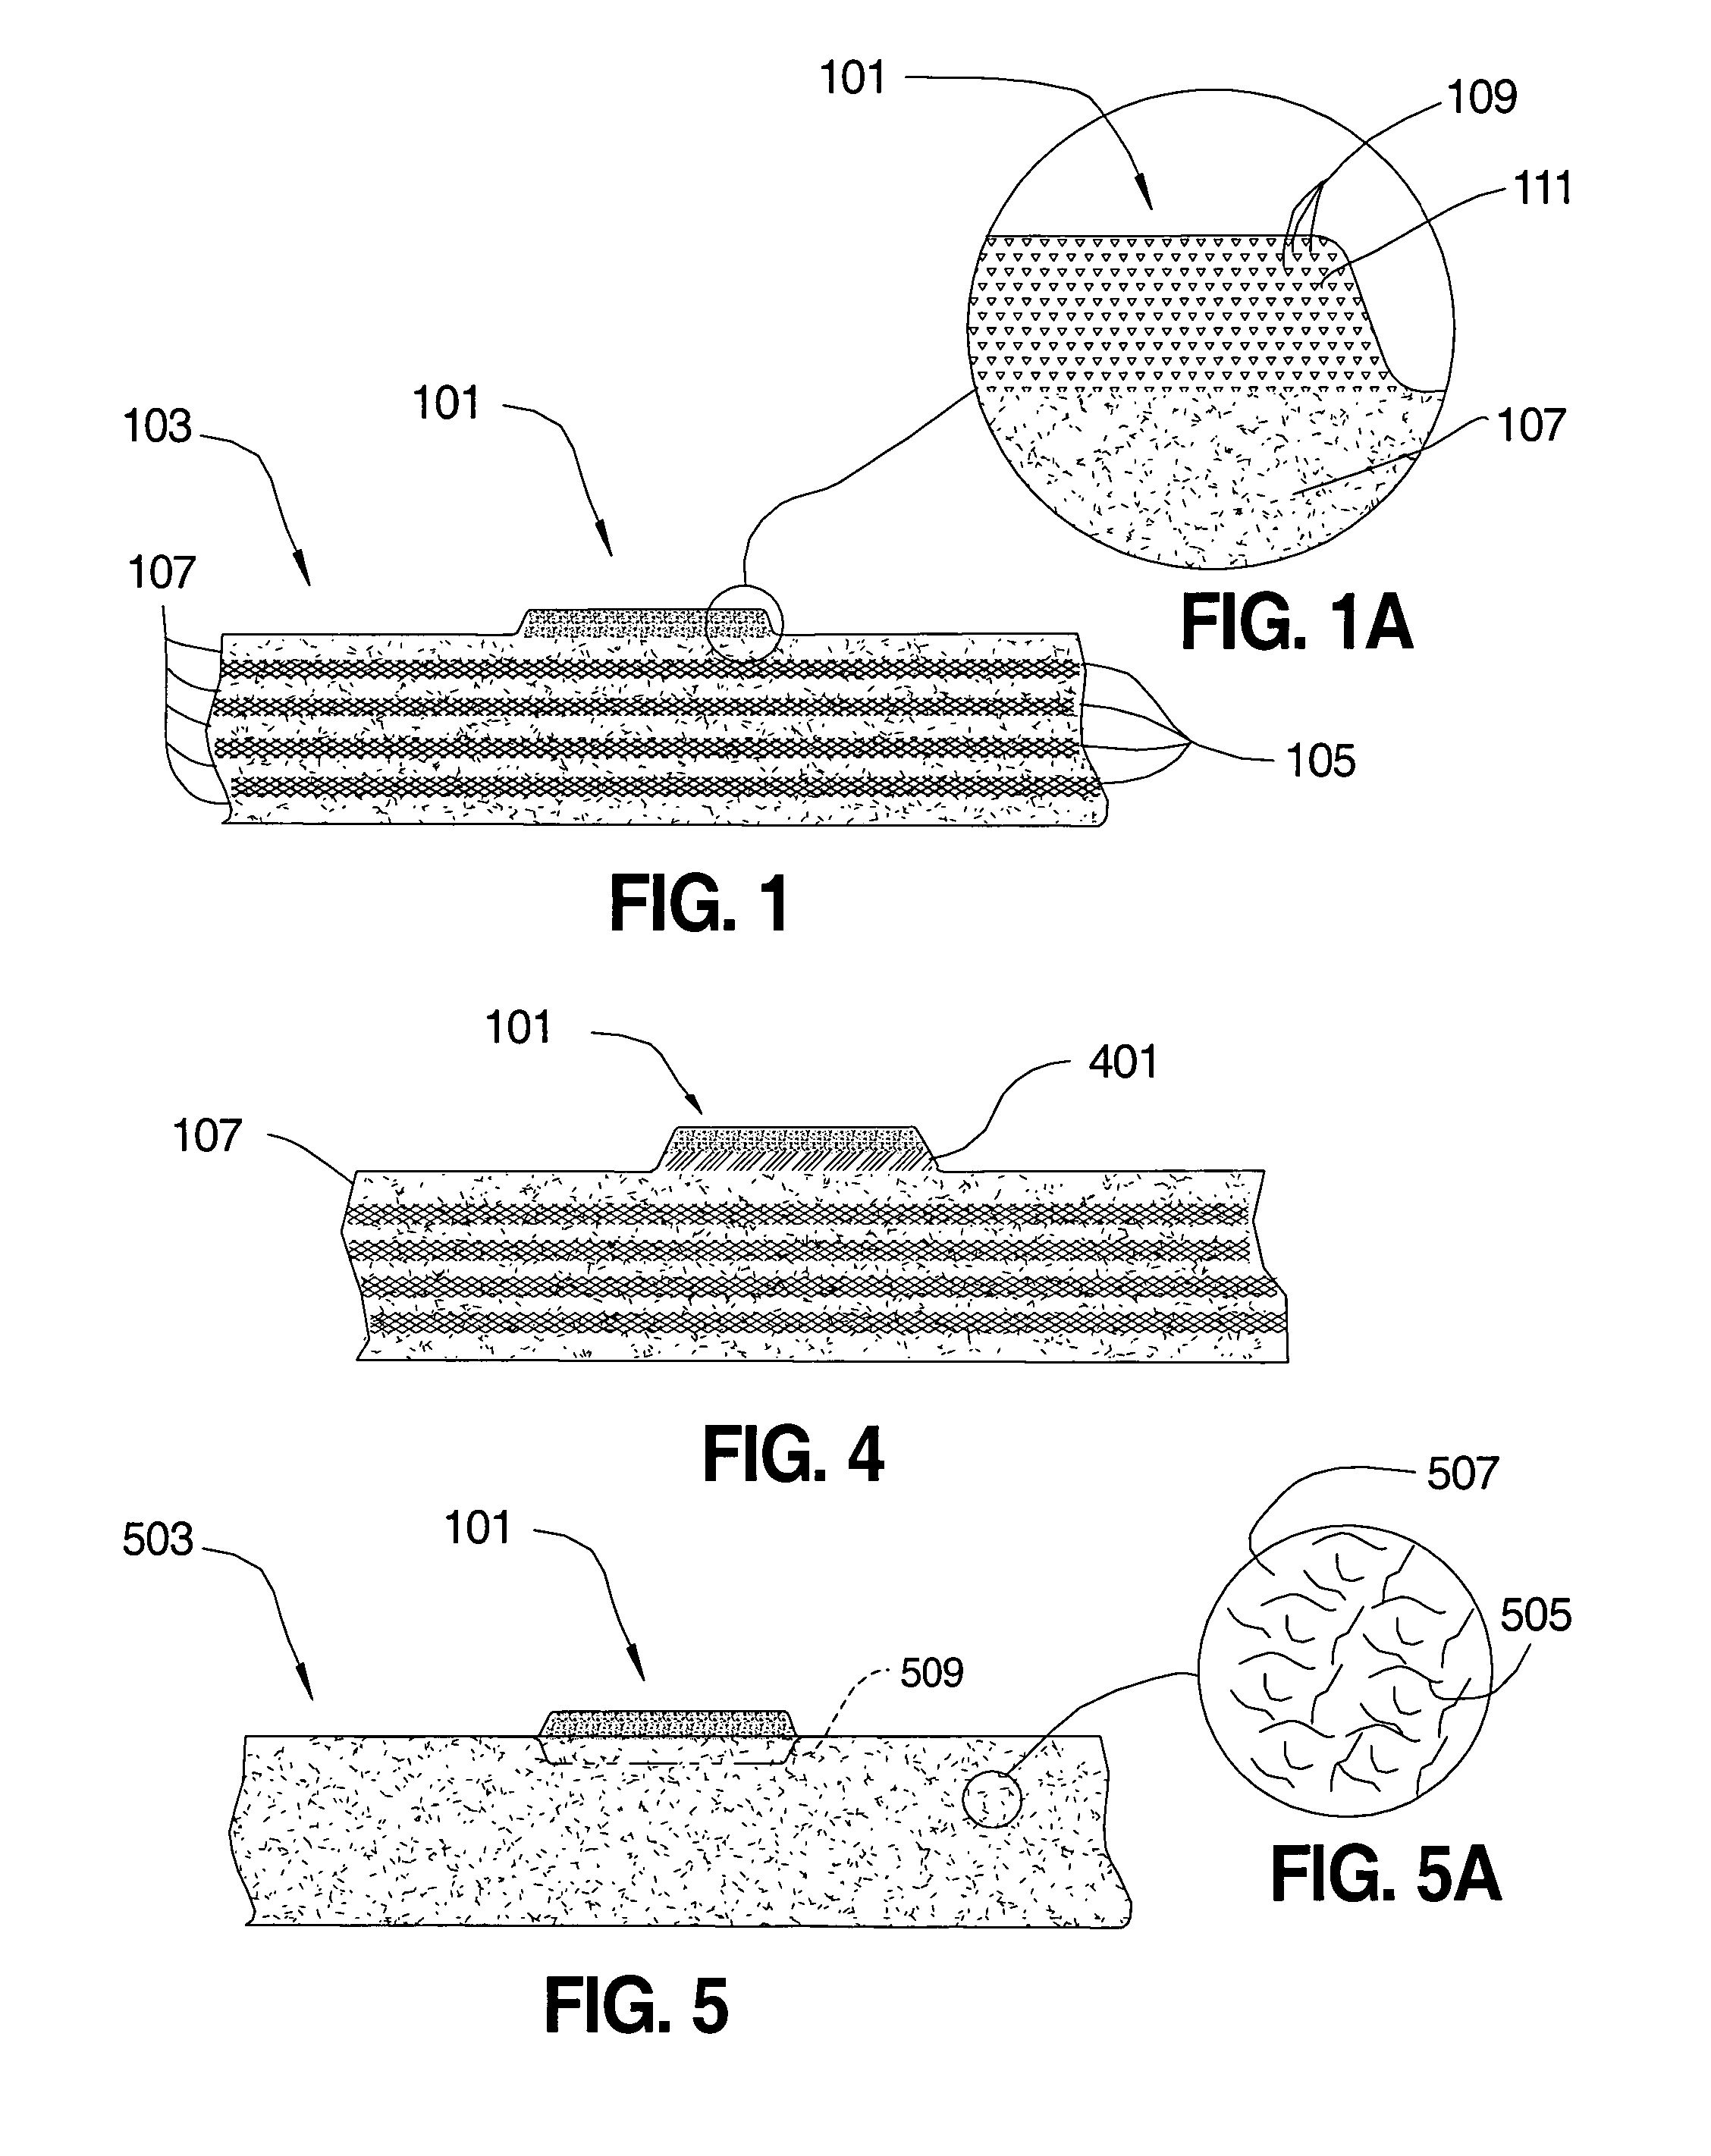 Heath monitoring method and apparatus for composite materials